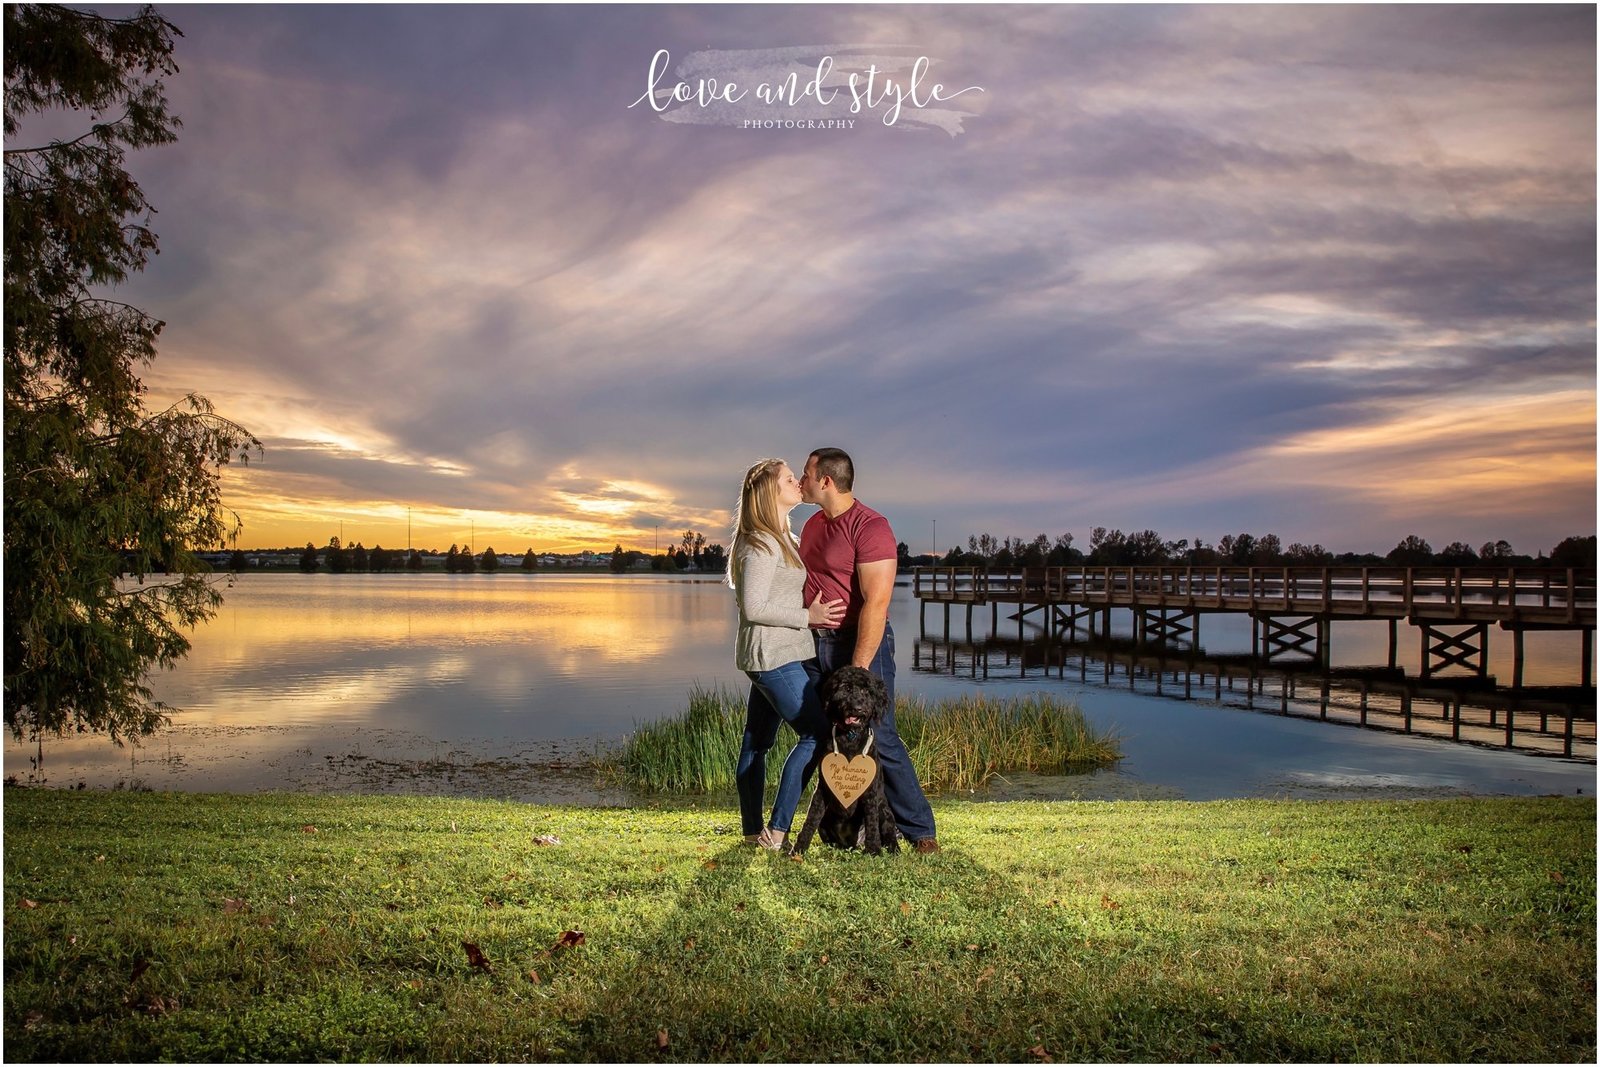 Engagement Photography at Heritage Harbour Park in Bradenton, FL